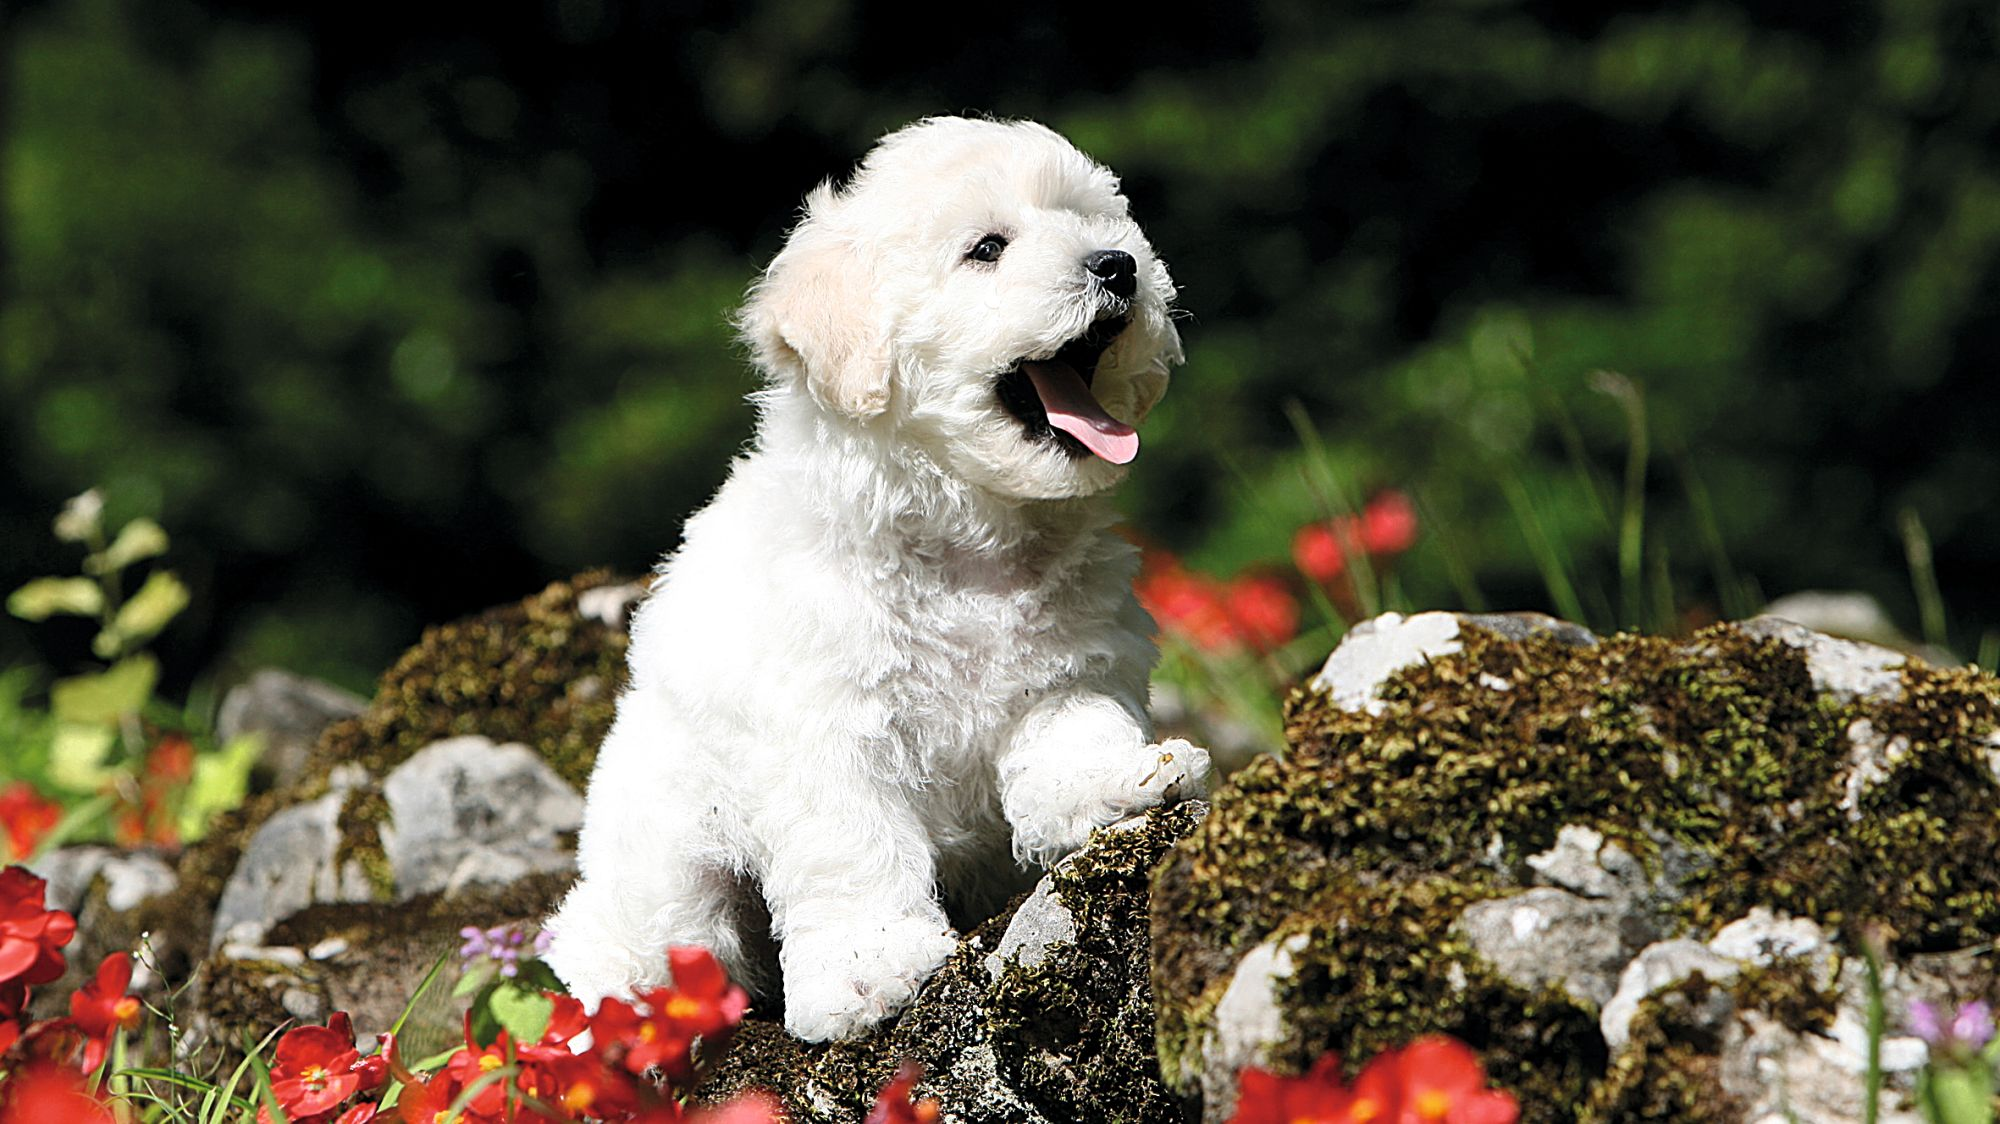 Bichon Frise puppy climbing a small rock surrounded by red flowers